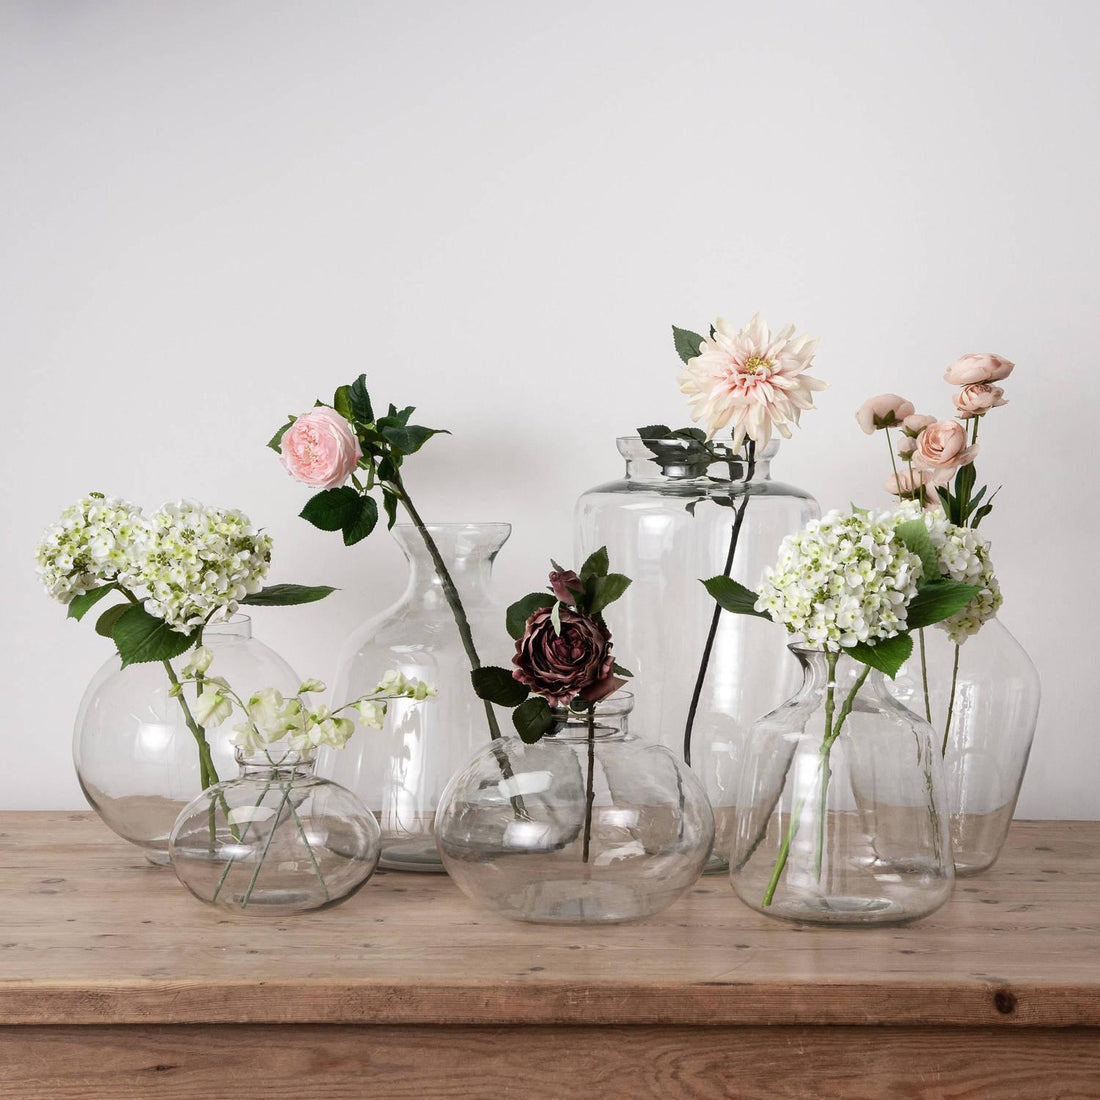 Large Hydria Glass Vase - £104.95 - Gifts & Accessories > Vases 